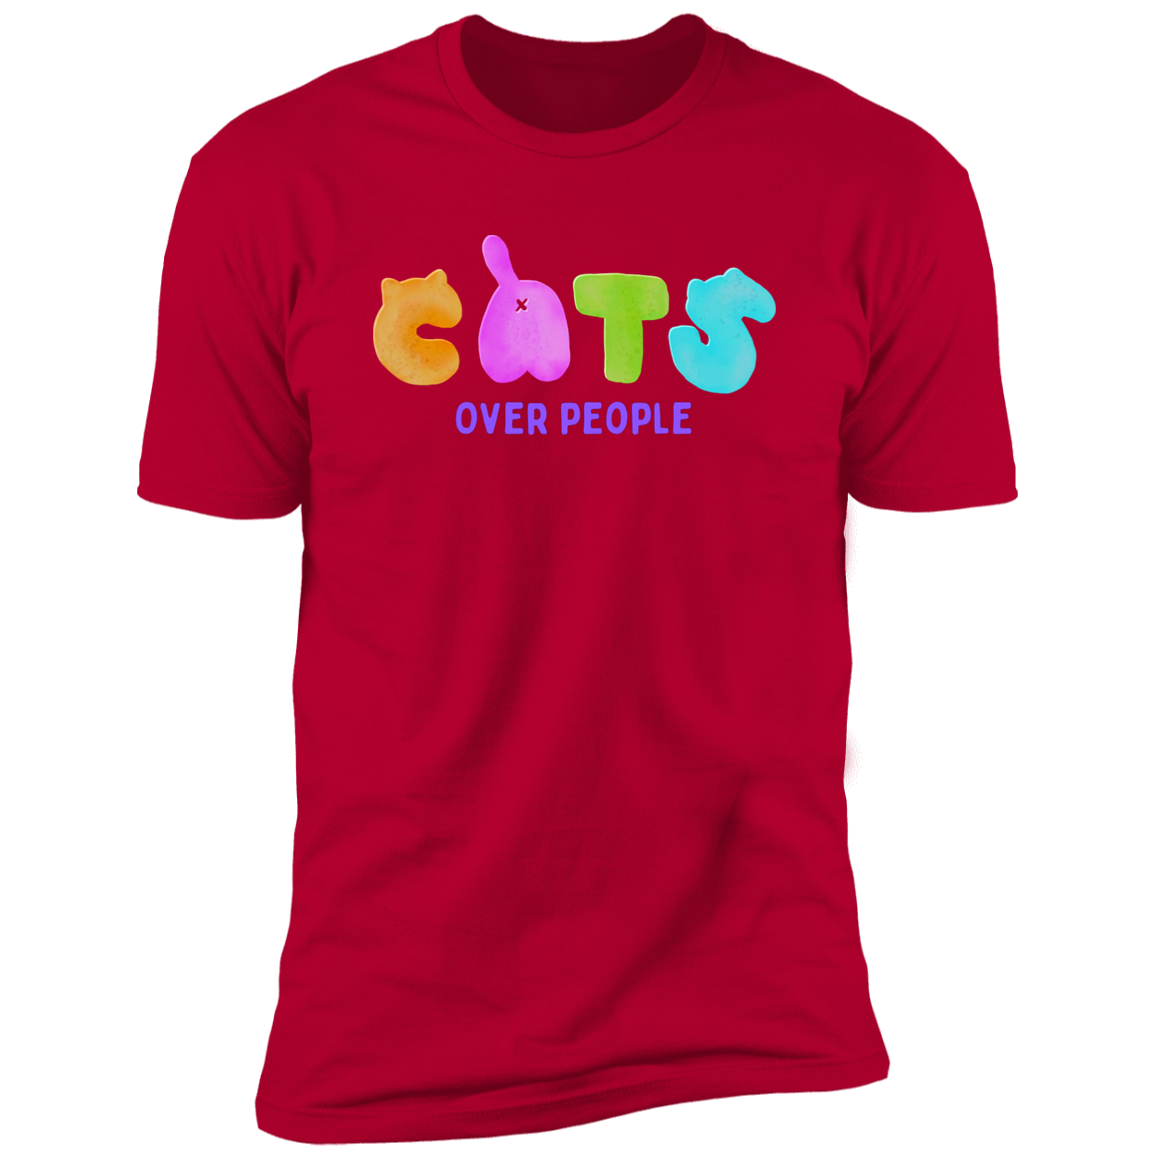 Cats Over People T-shirt, Cat Shirt for humans, in red